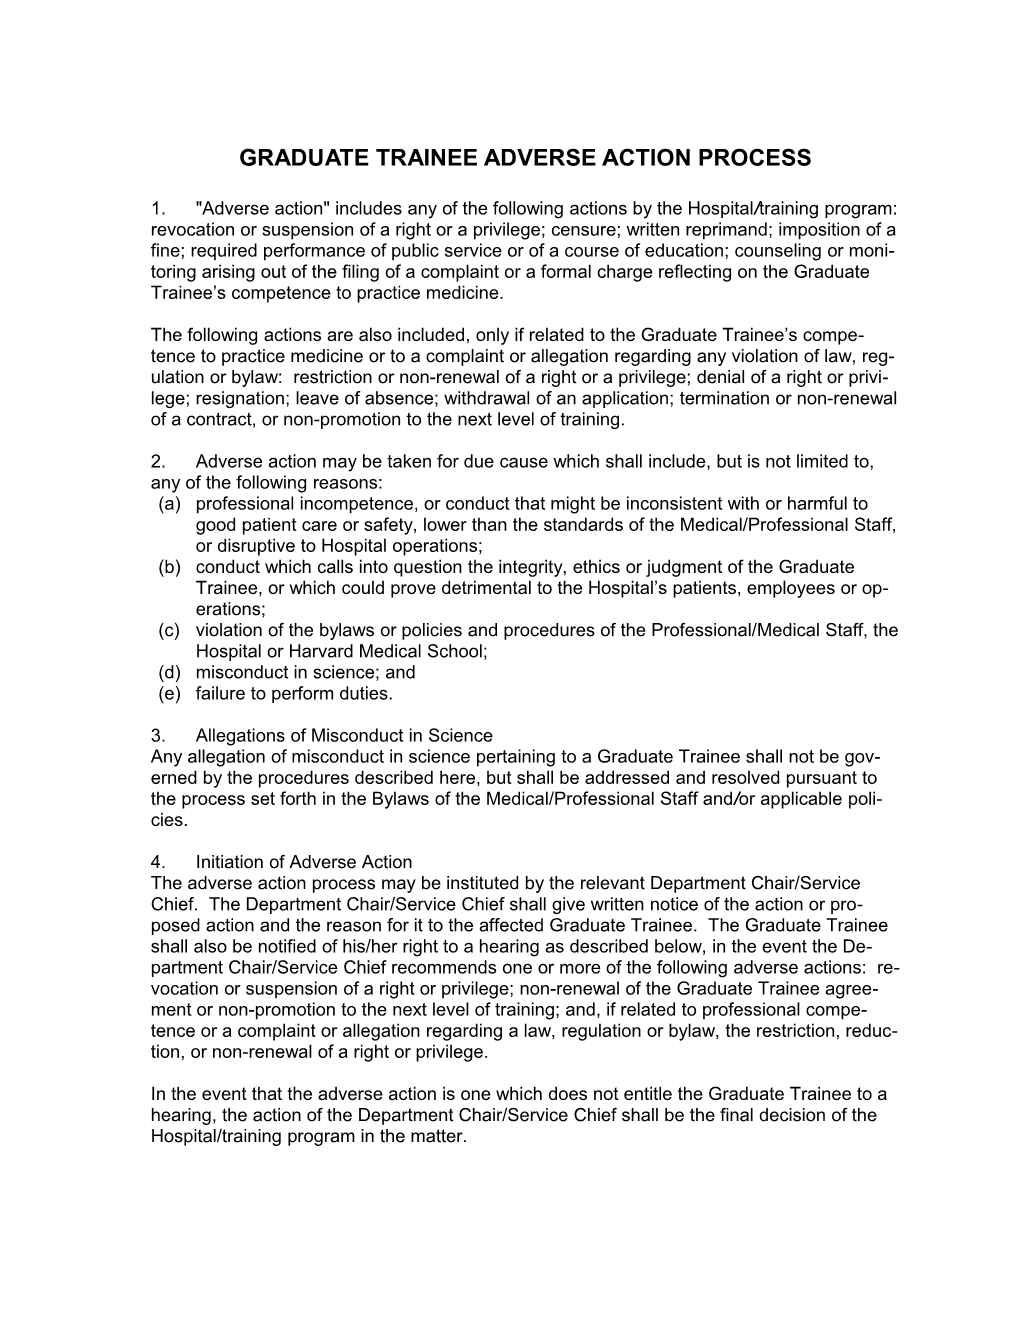 ADVERSE ACTION PROCESS (Proposed Edits in Bold Italics)